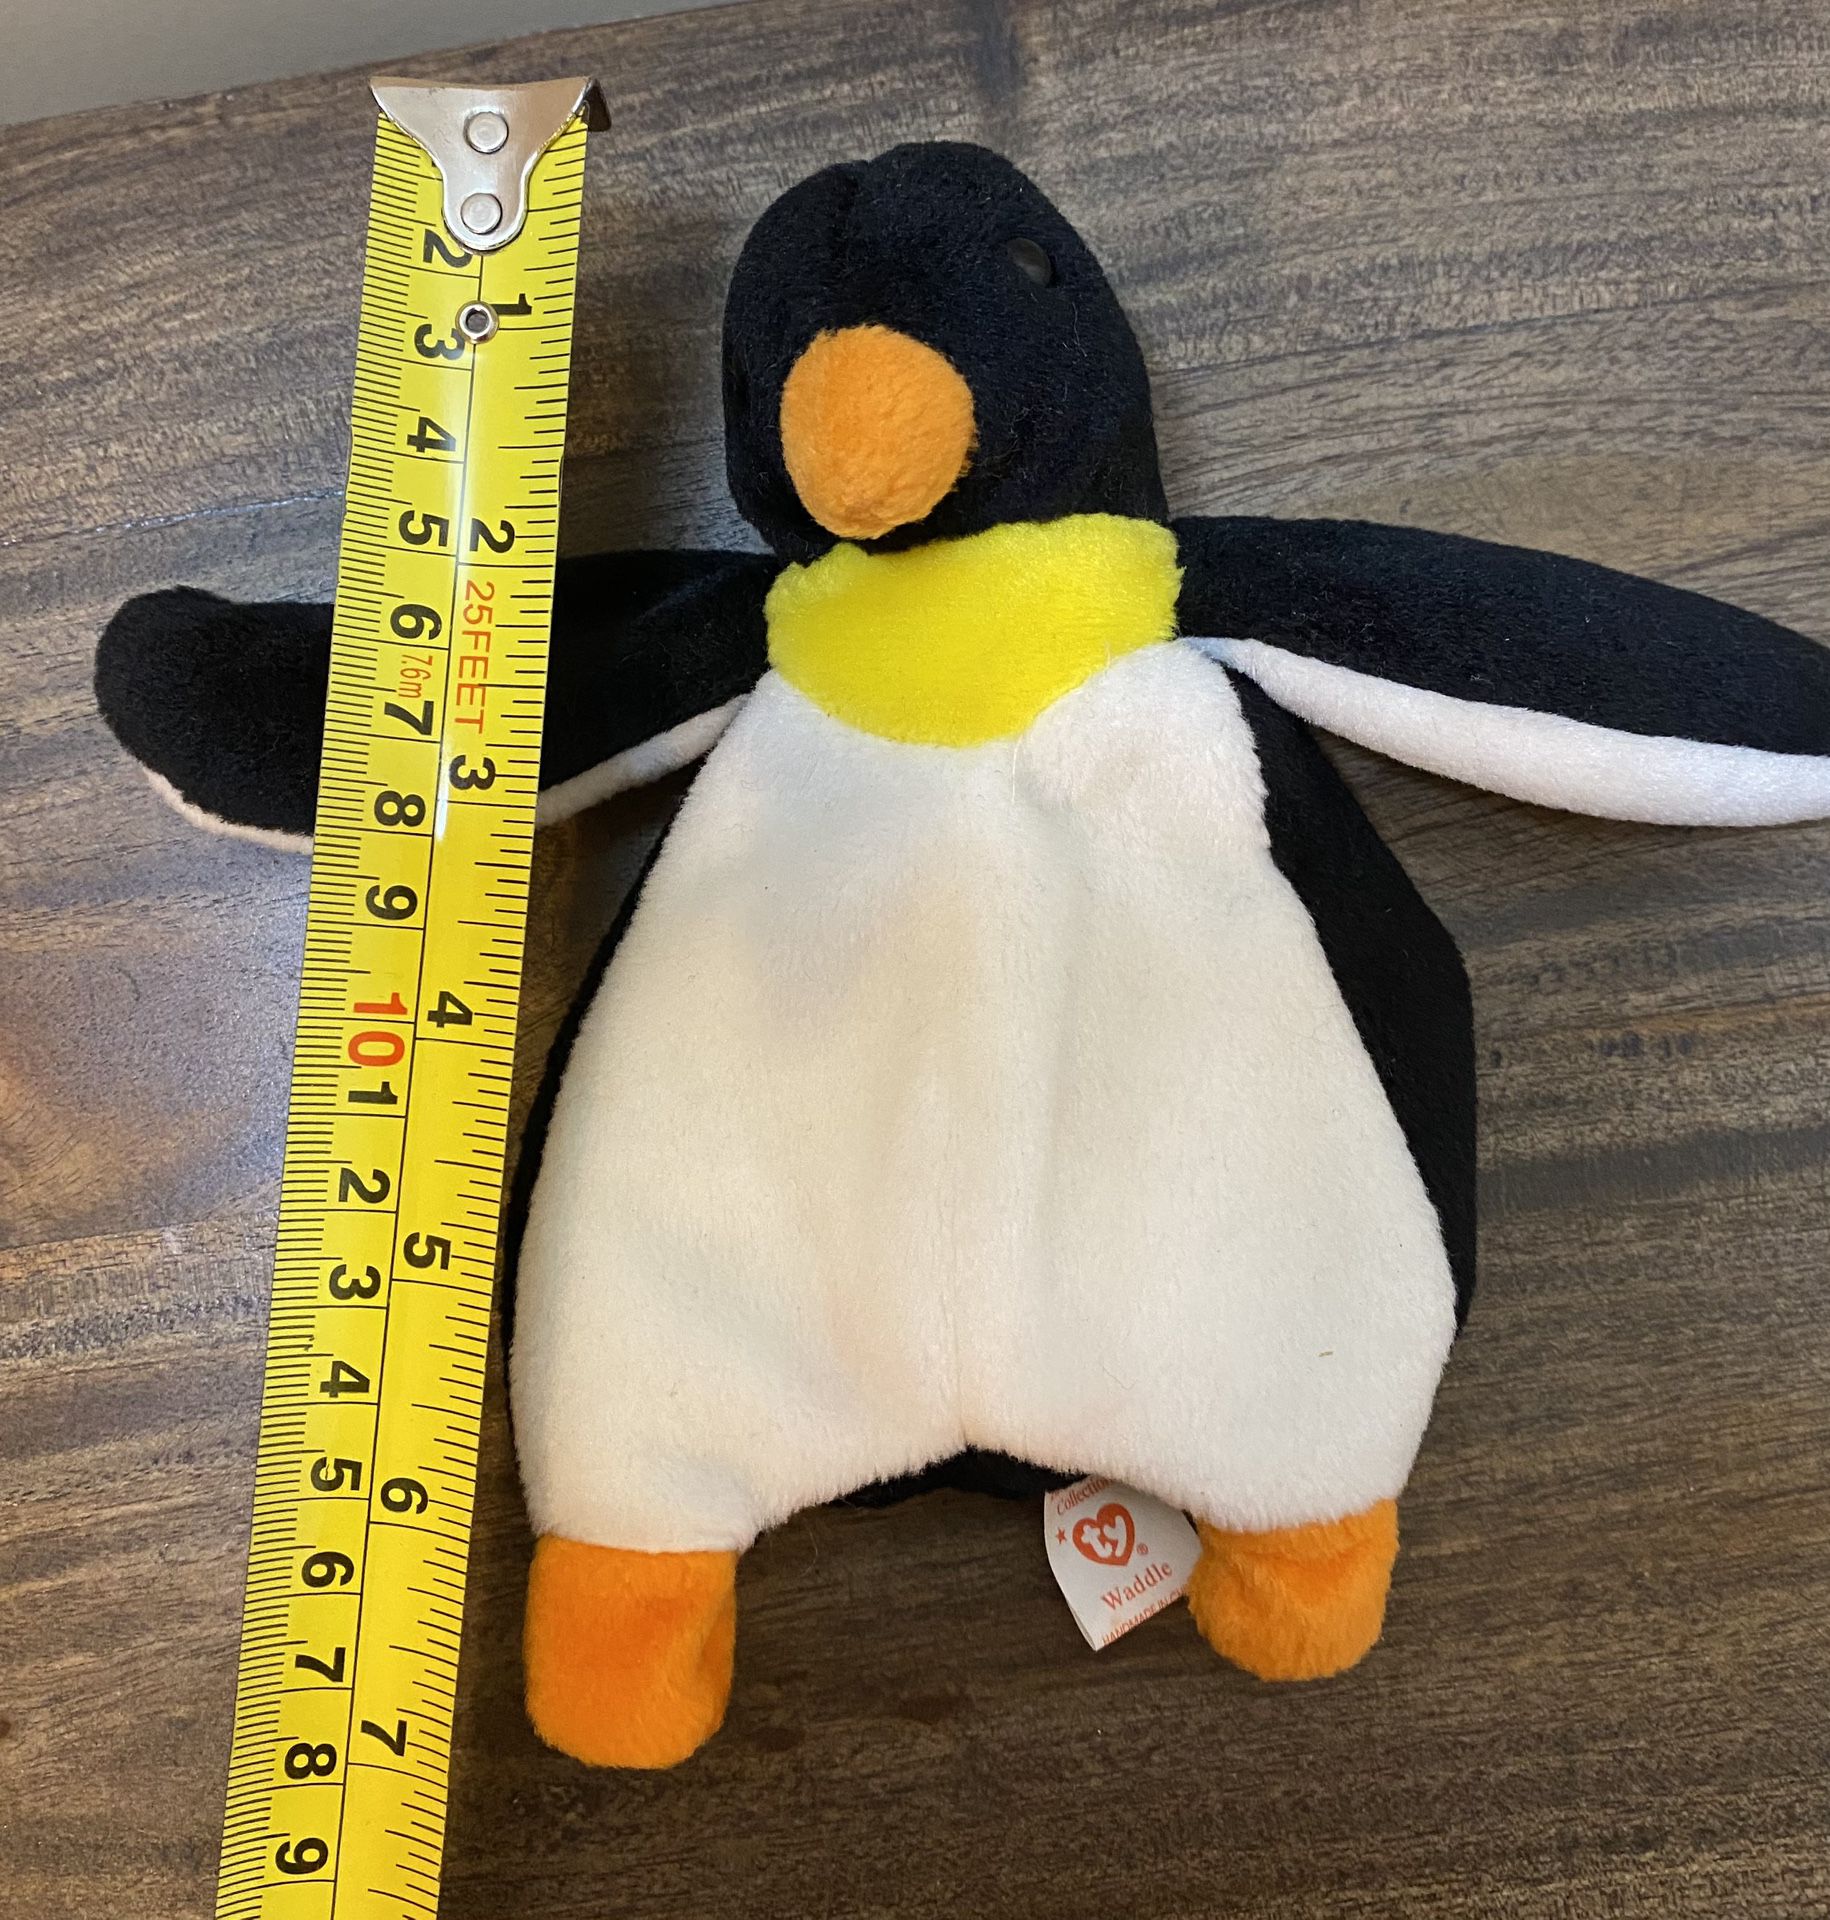 TY Beanie babies Penguin Waddle approximately 7” Tall